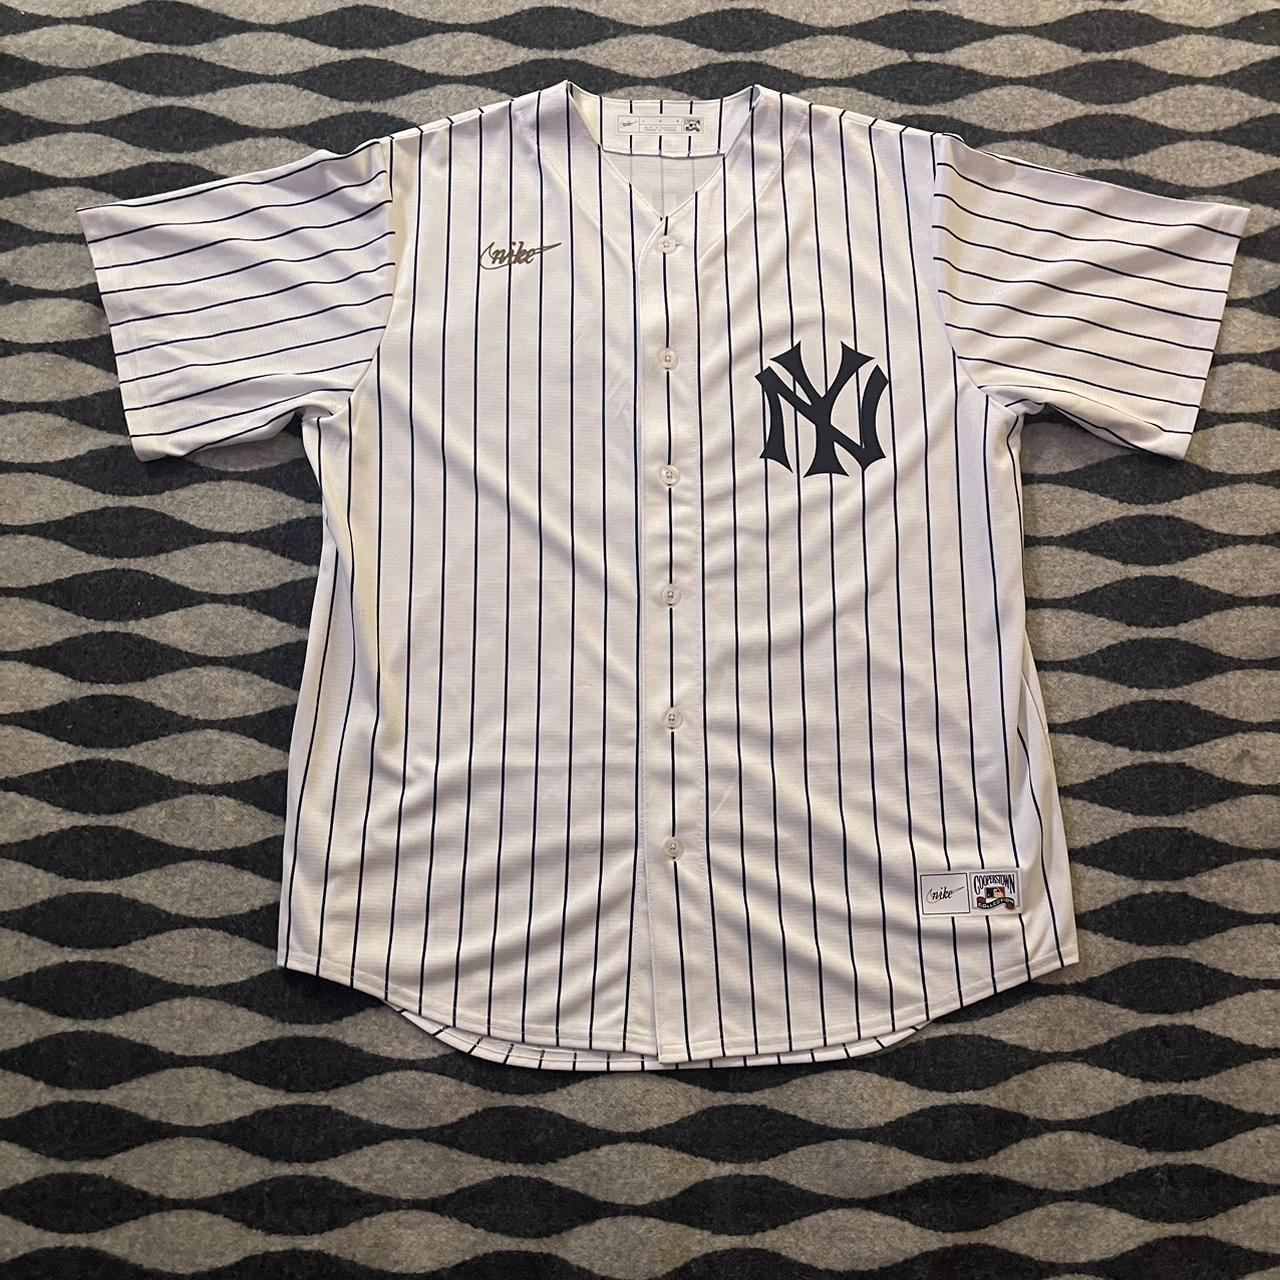 Men's Nike Babe Ruth New York Yankees Cooperstown Collection Navy